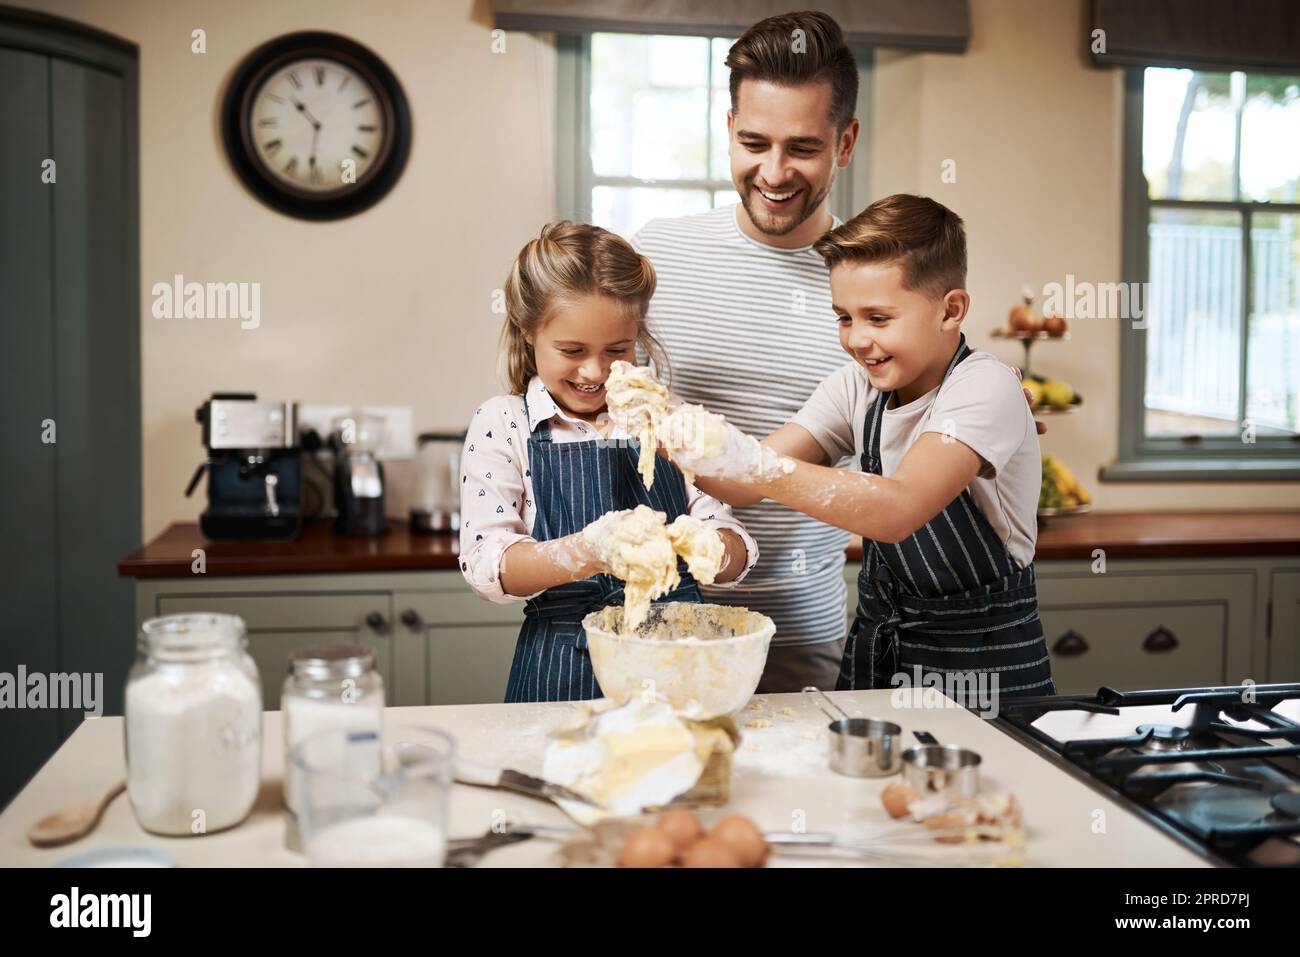 Im happy when my kids are happy. a man and his two children baking in the kitchen at home. Stock Photo